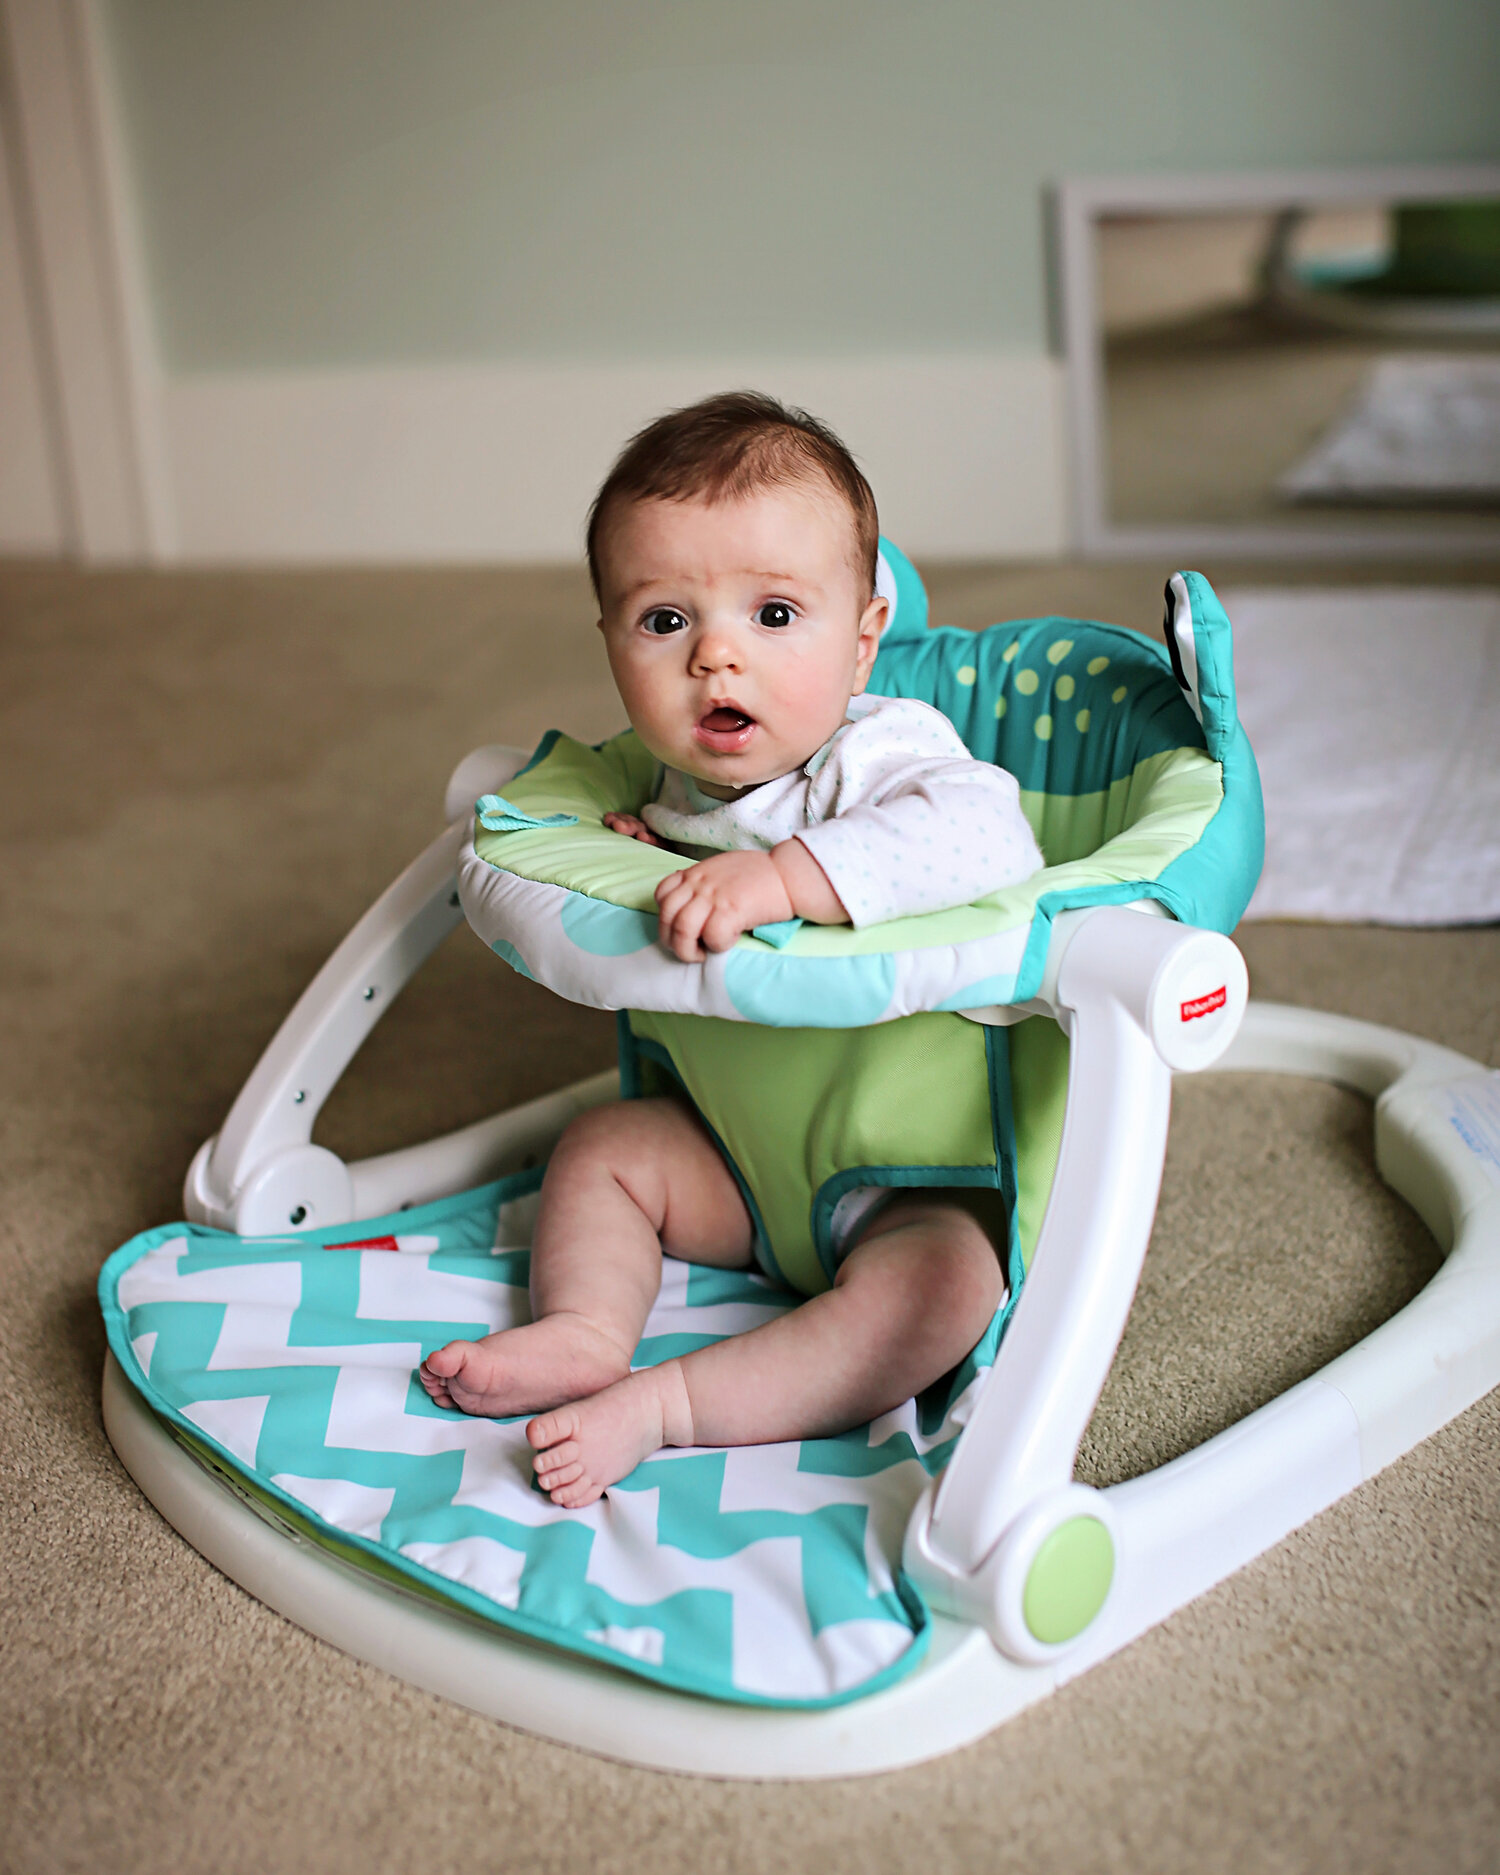 Choosing The Best Baby Seat And Using It Wisely Cando Kiddo